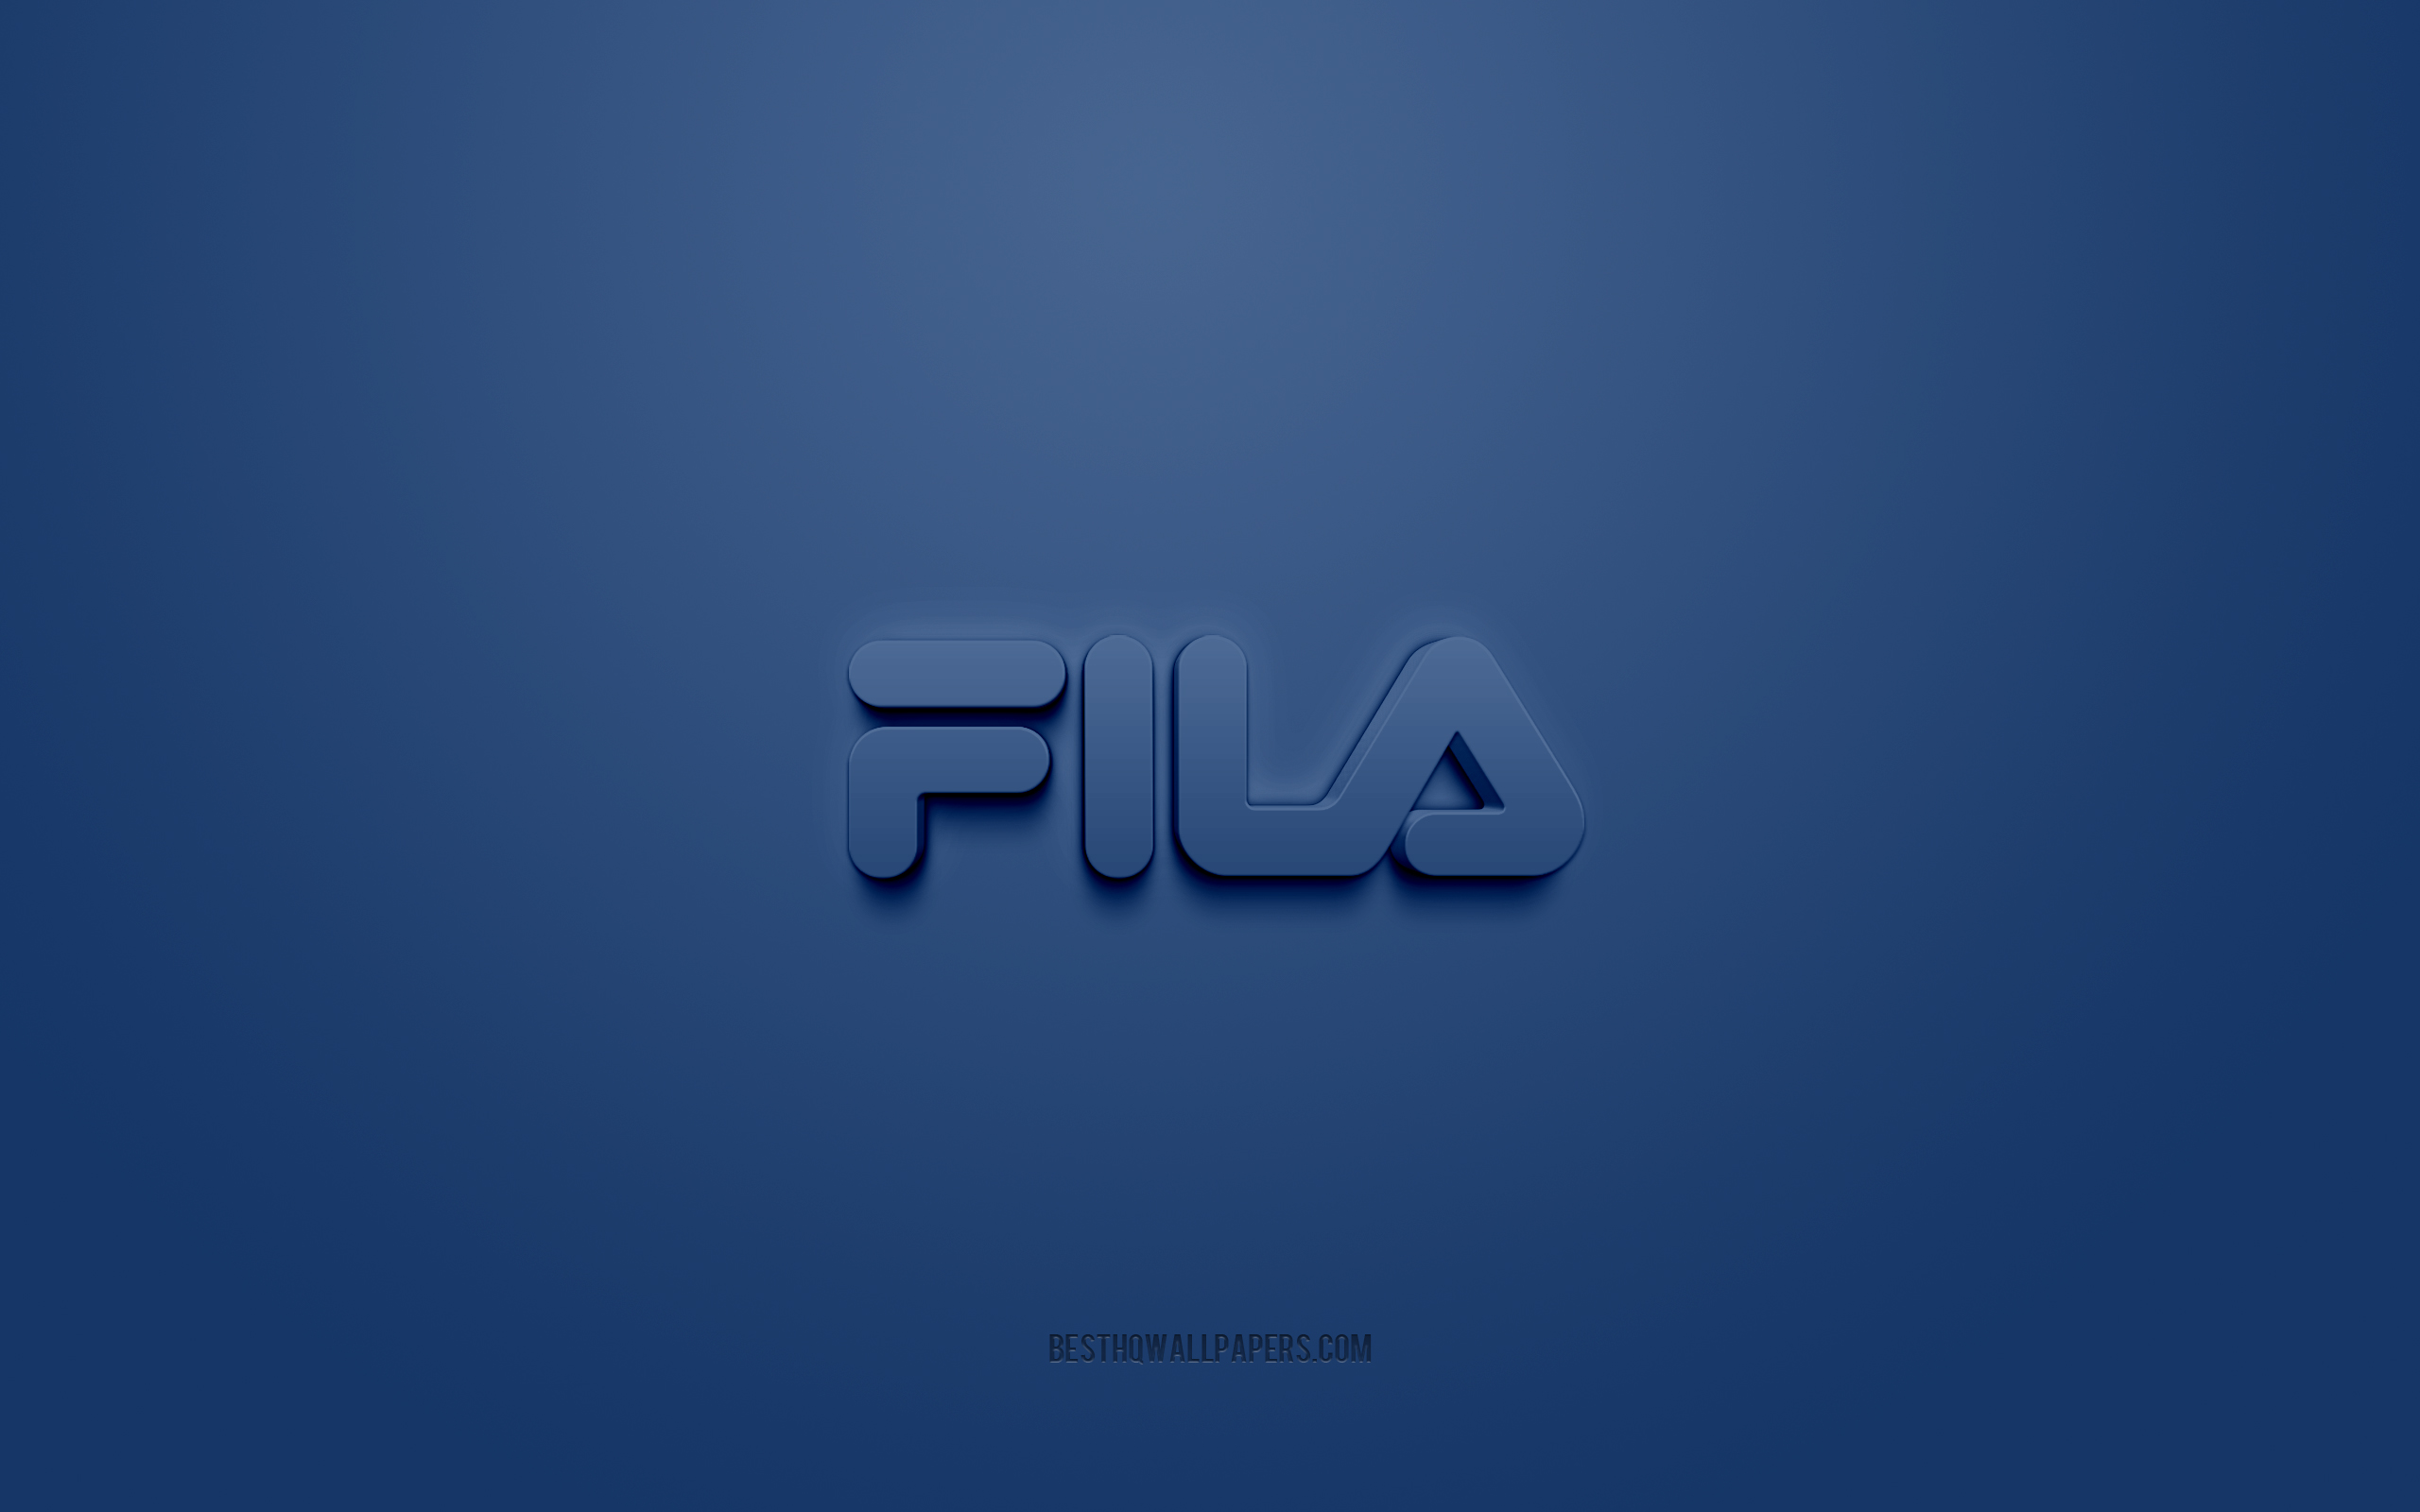 Download wallpaper Fila logo, blue background, Fila 3D logo, 3D art, Fila, brands logo, blue 3D Fila logo for desktop with resolution 2560x1600. High Quality HD picture wallpaper